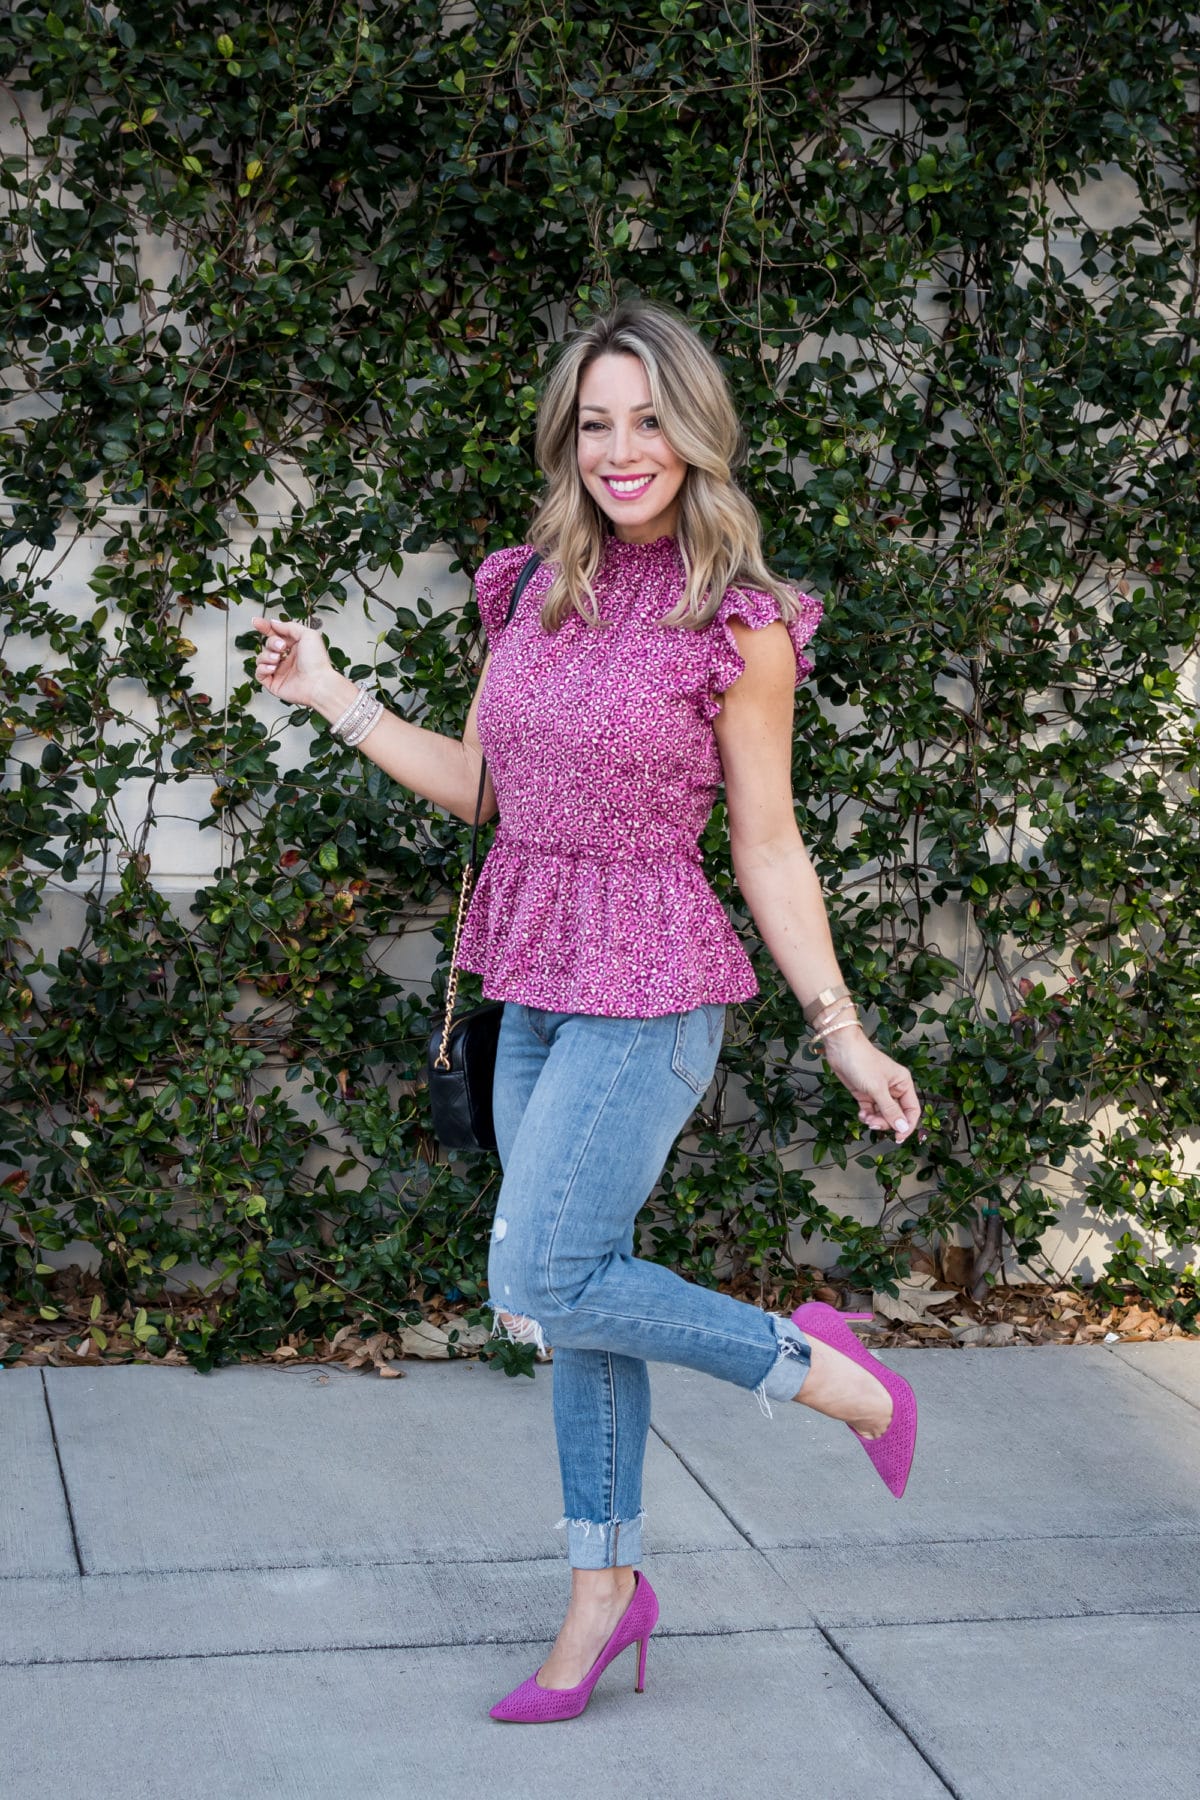 Valentine Day Outfits, Pink Peplum Top, Jeans, Heels